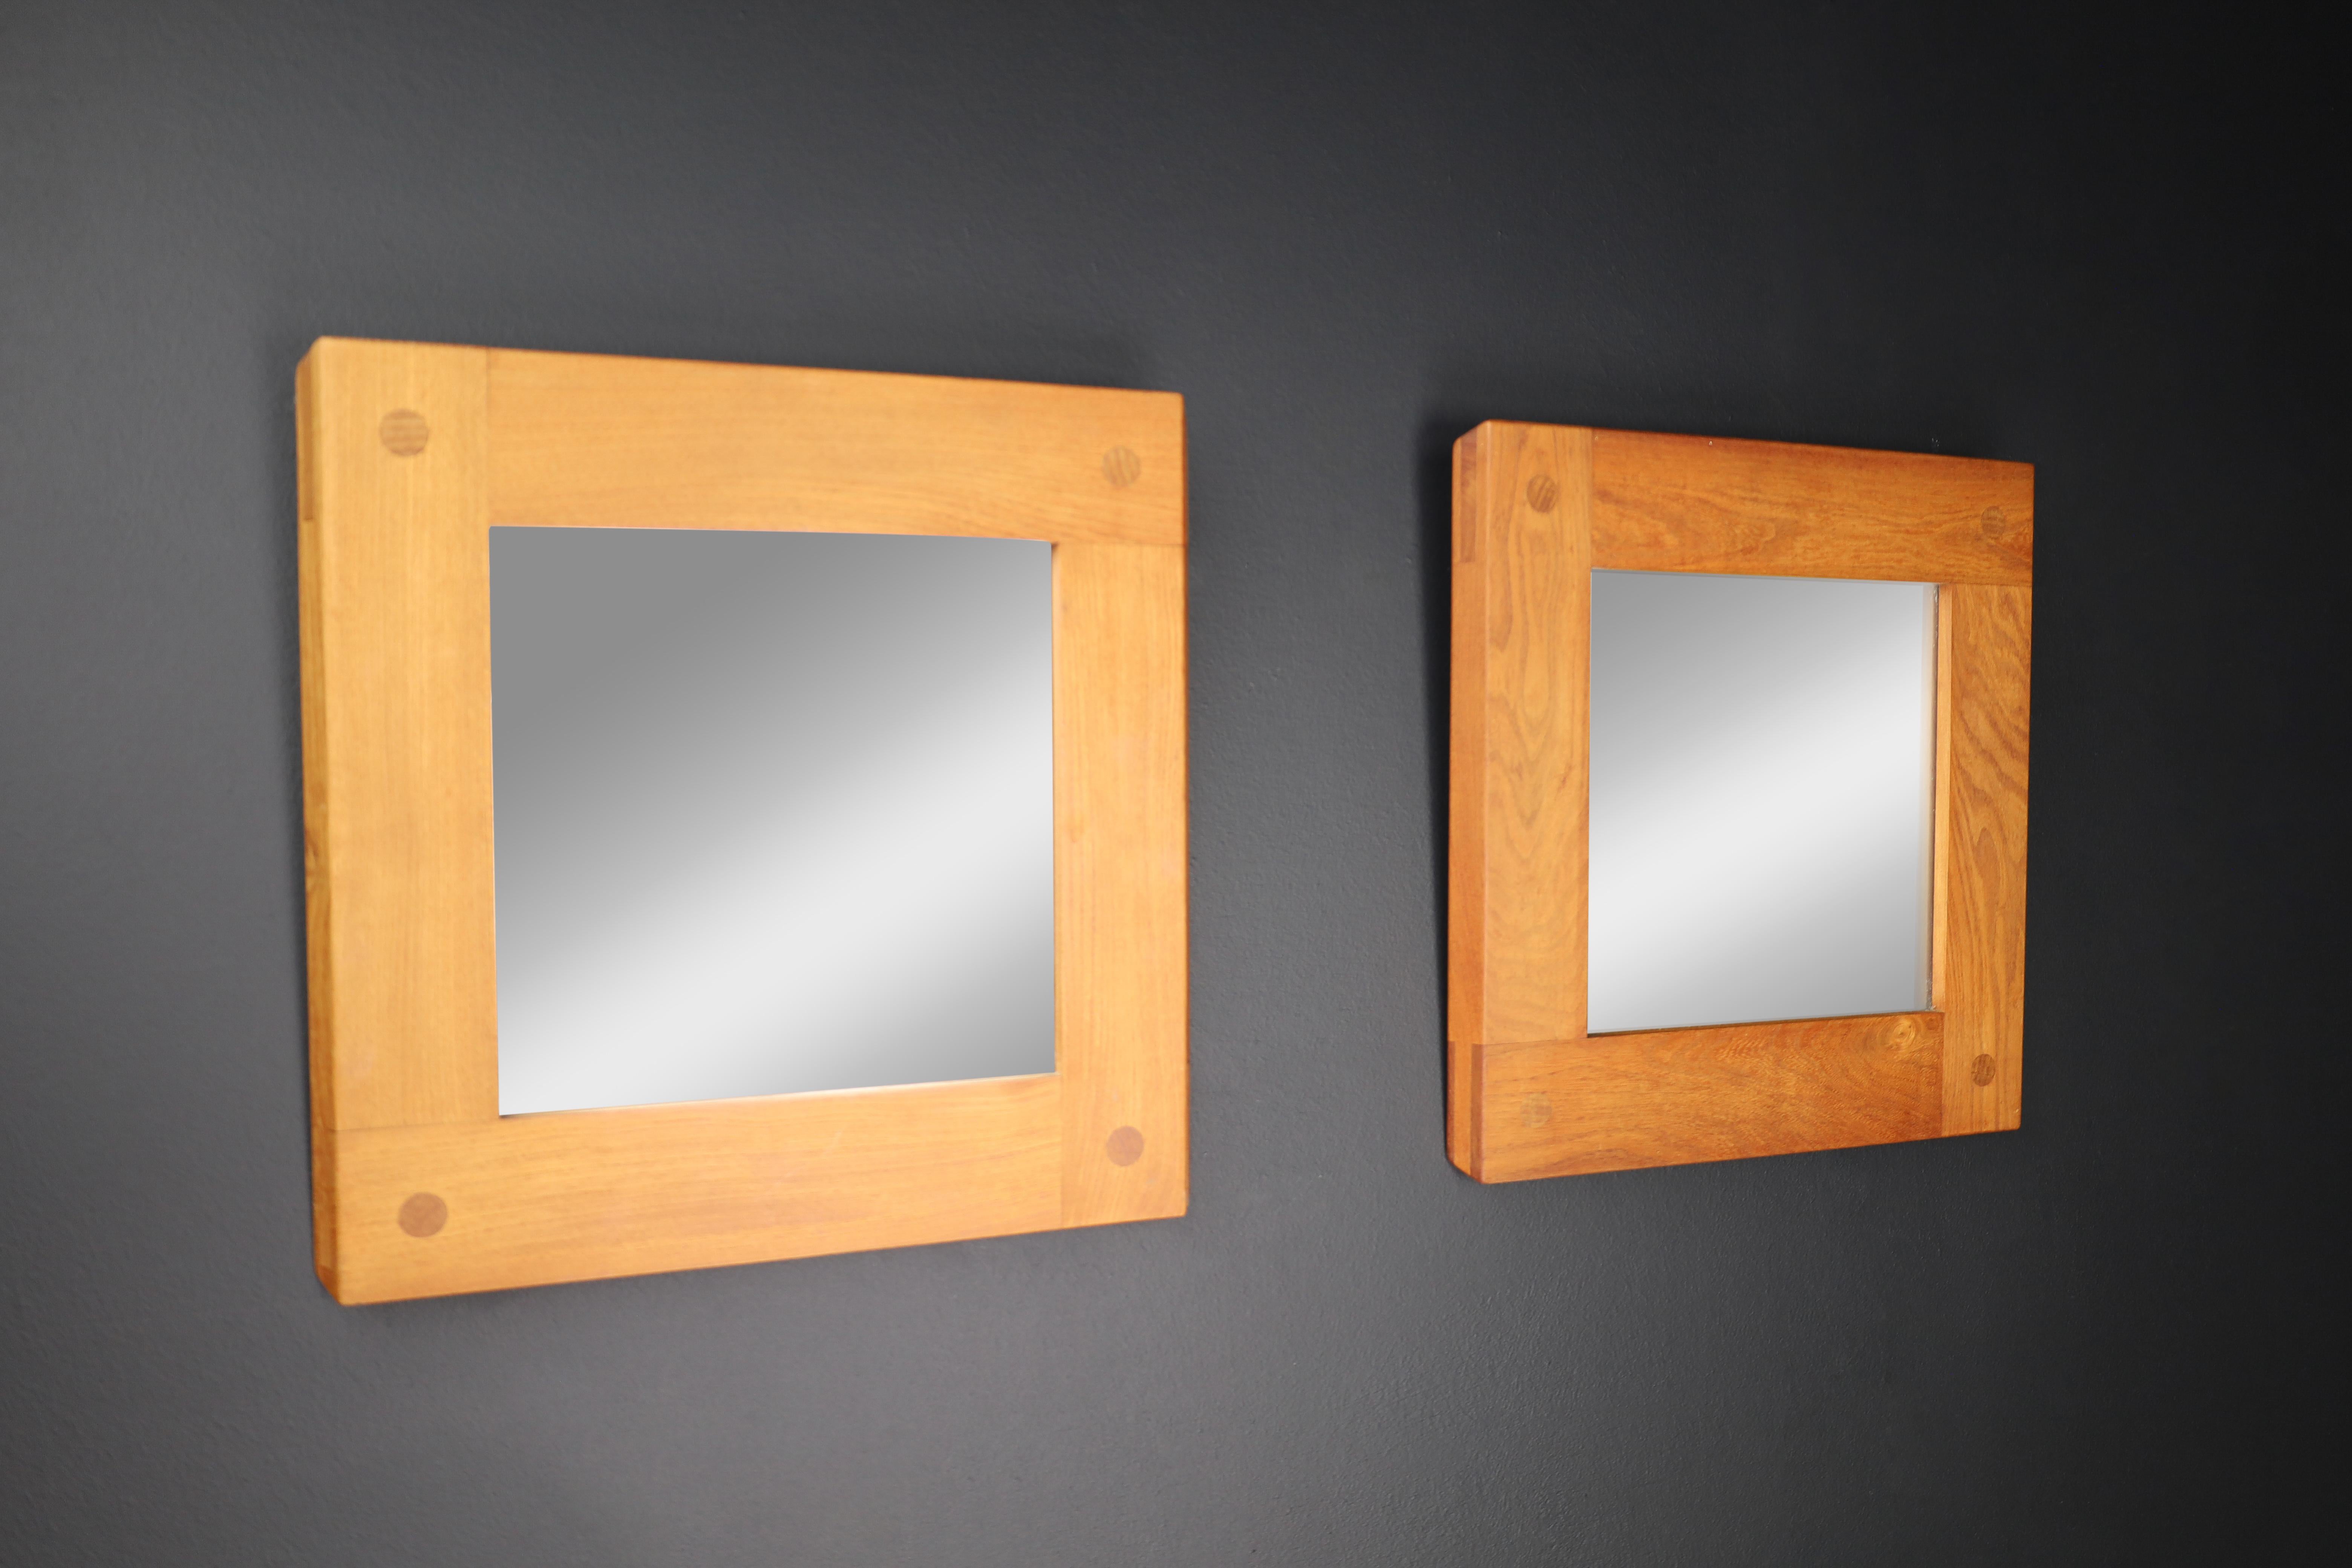 Pierre Chapo Pair of two Mirrors in Elm, France 1970s

This is a pair of two mirrors made by Pierre Chapo in France in the 1970s, crafted from solid elm wood. The mirror boasts of exceptional durability and remarkable visual appeal. The construction